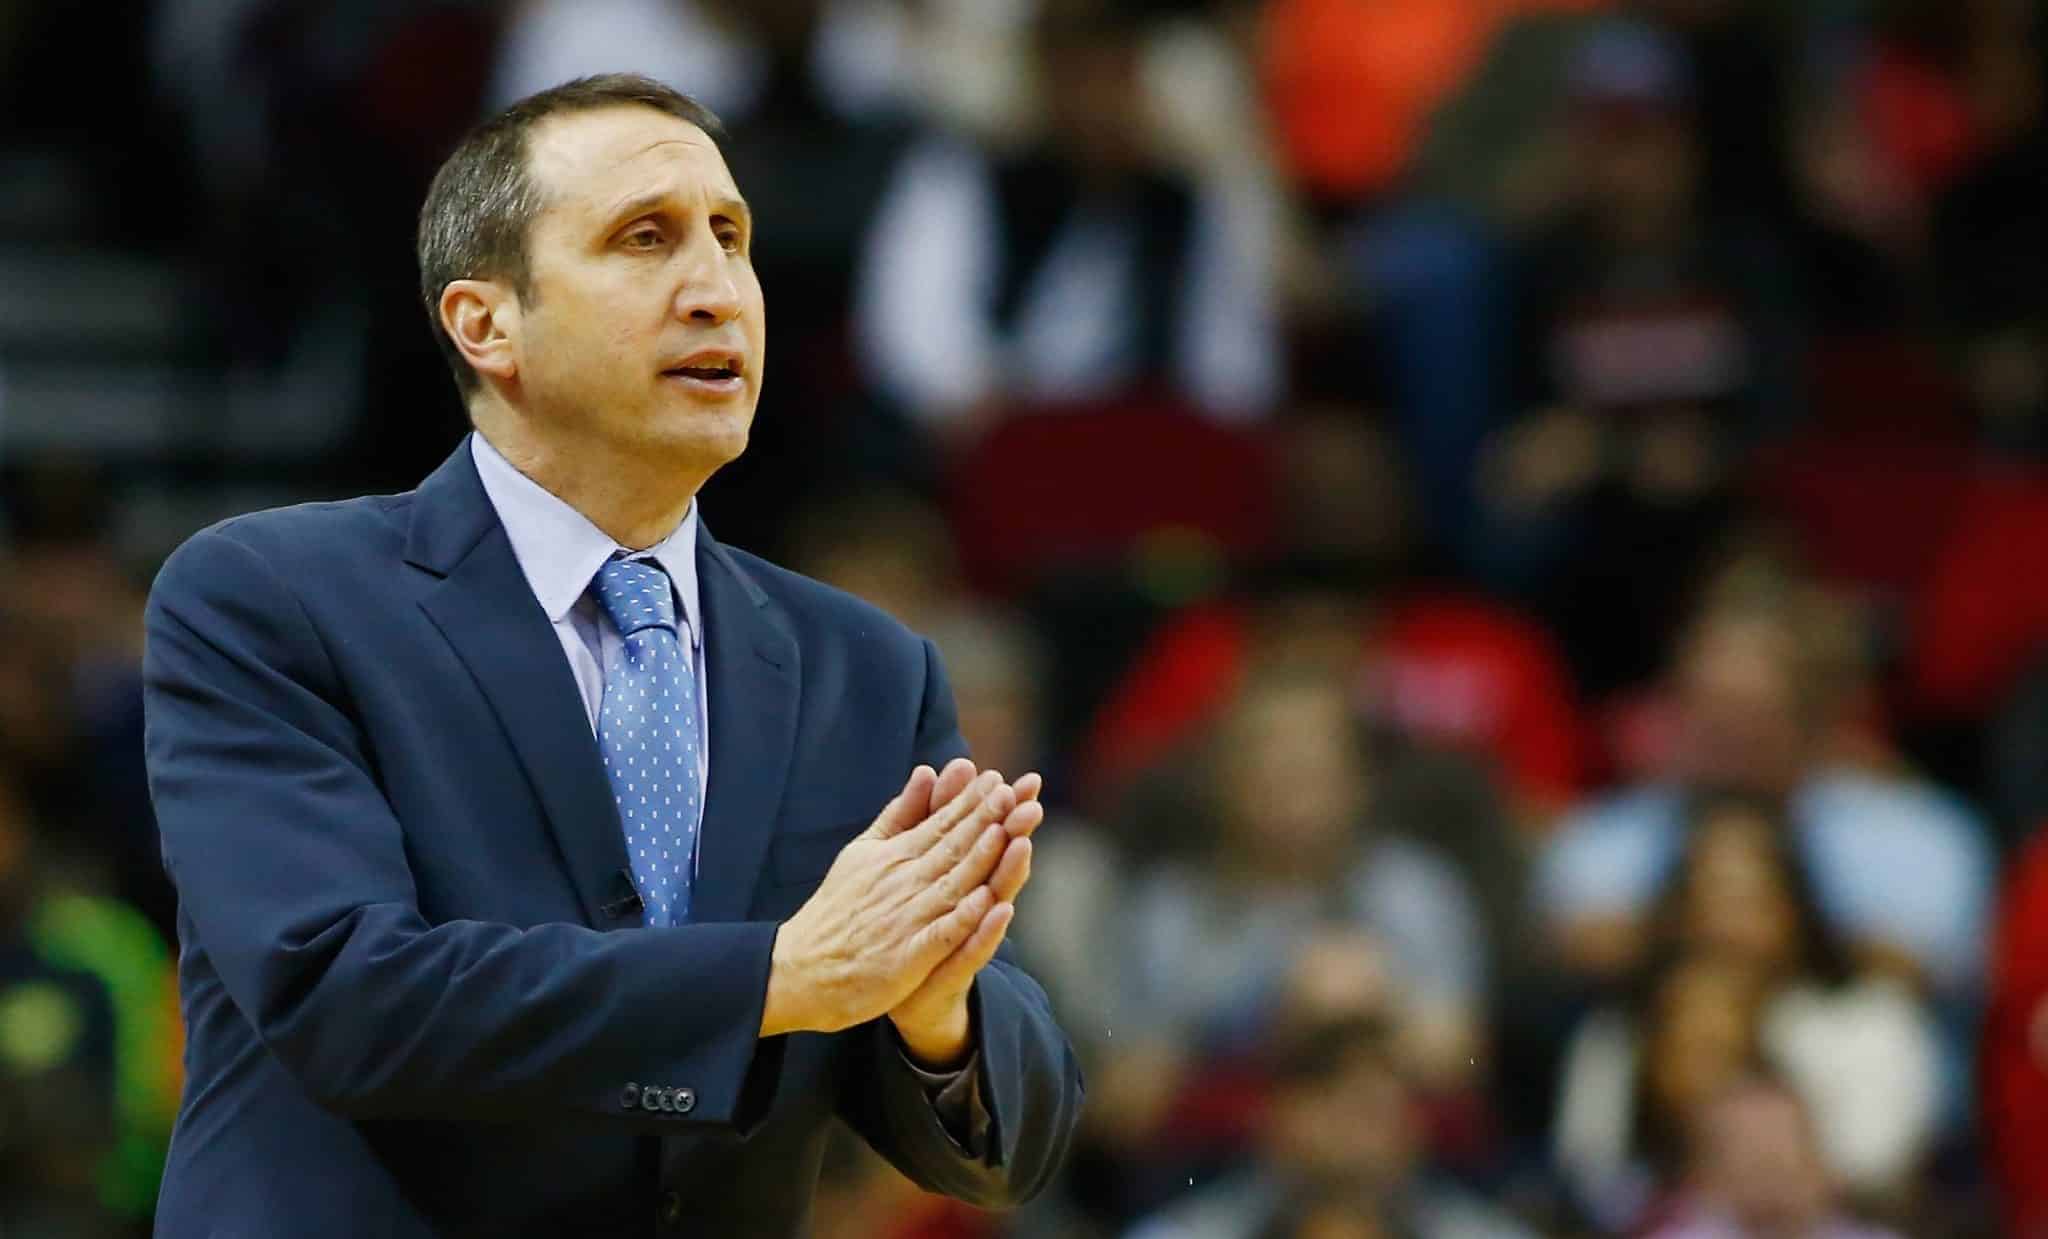 HOUSTON, TX - JANUARY 15: Head coach David Blatt of the Cleveland Cavaliers watches the play on the court during their game against the Houston Rockets at the Toyota Center on January 15, 2016 in Houston, Texas.